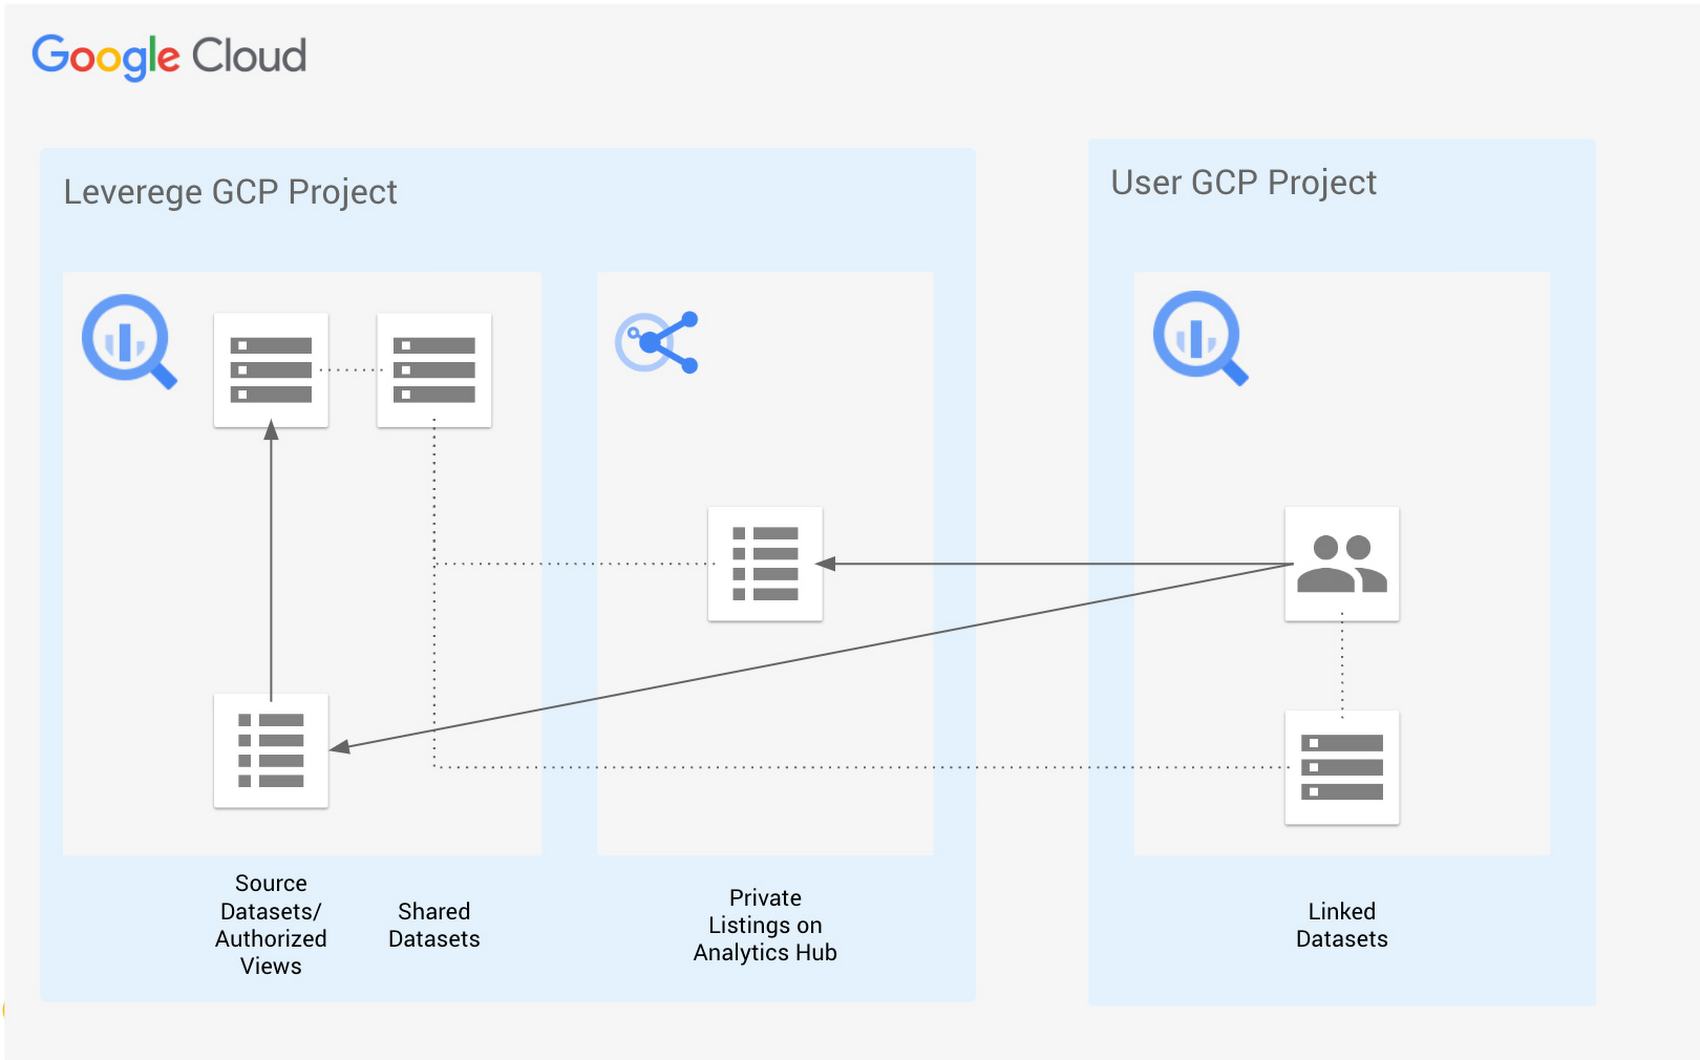 https://zephyrnet.com/wp-content/uploads/2023/02/built-with-bigquery-how-bigquery-helps-leverege-deliver-business-critical-enterprise-iot-solutions-at-scale-2.png